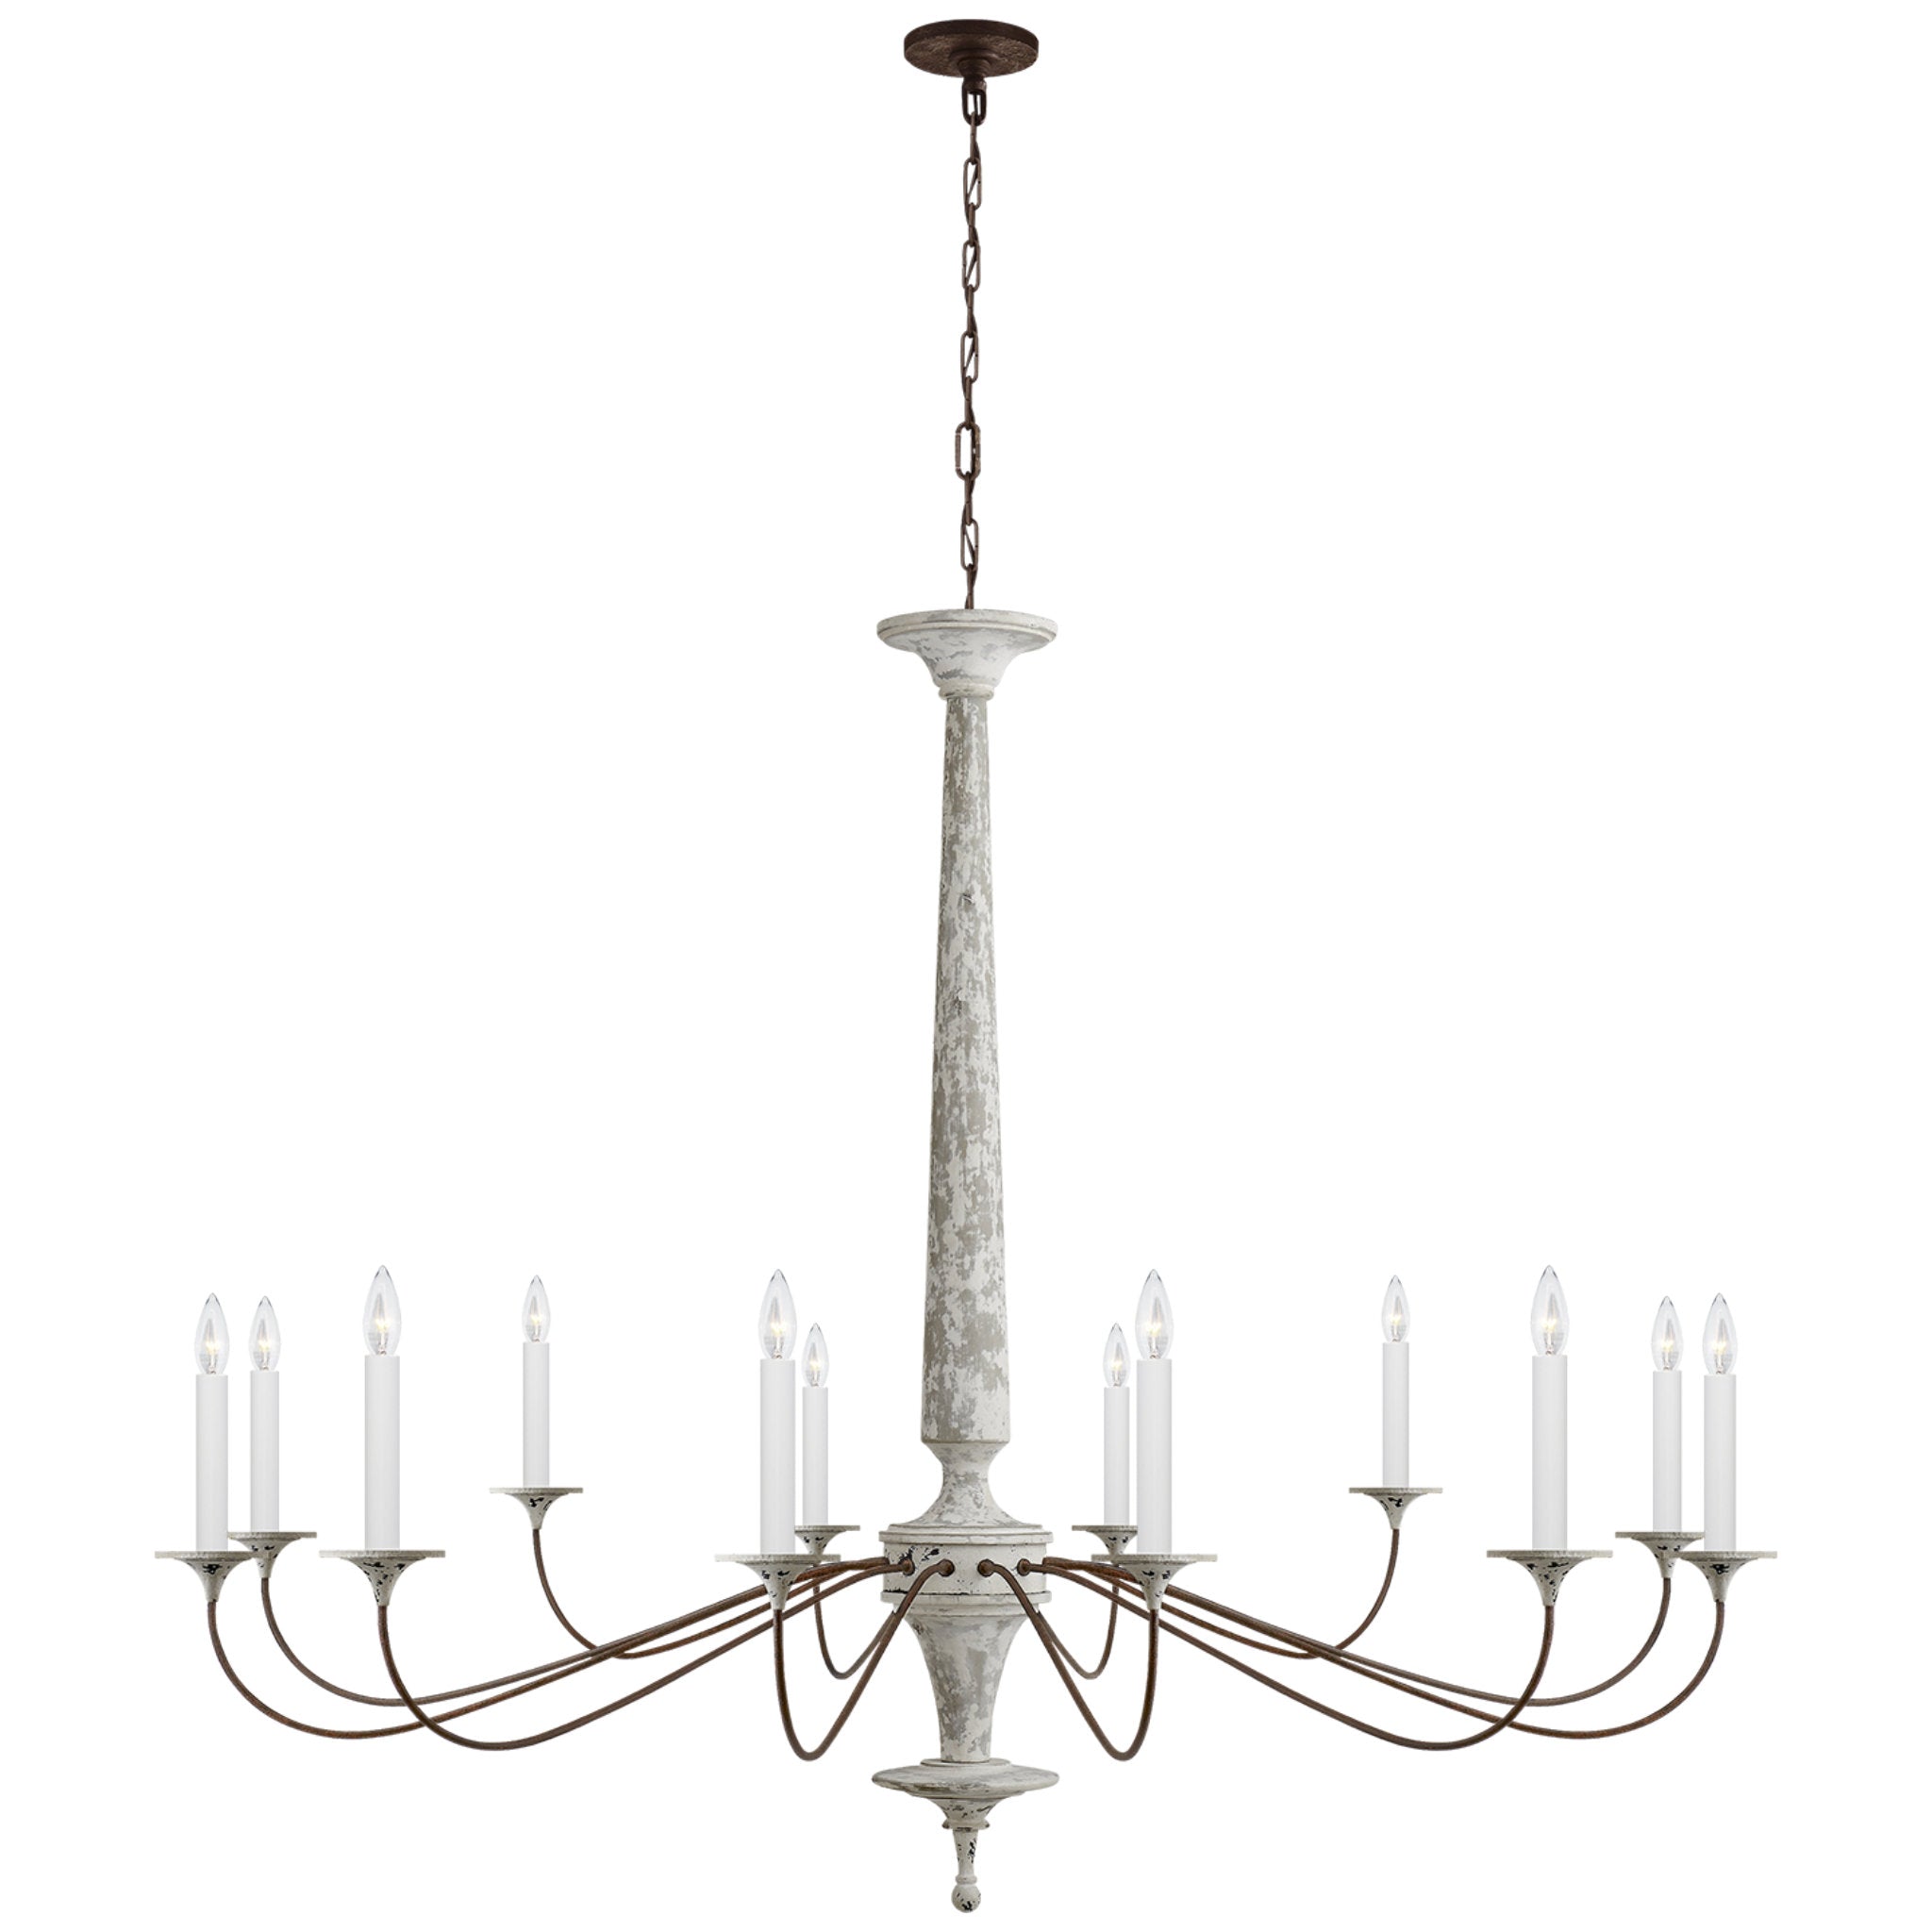 Suzanne Kasler Bordeaux Grande Chandelier in Swedish White and Natural Rust